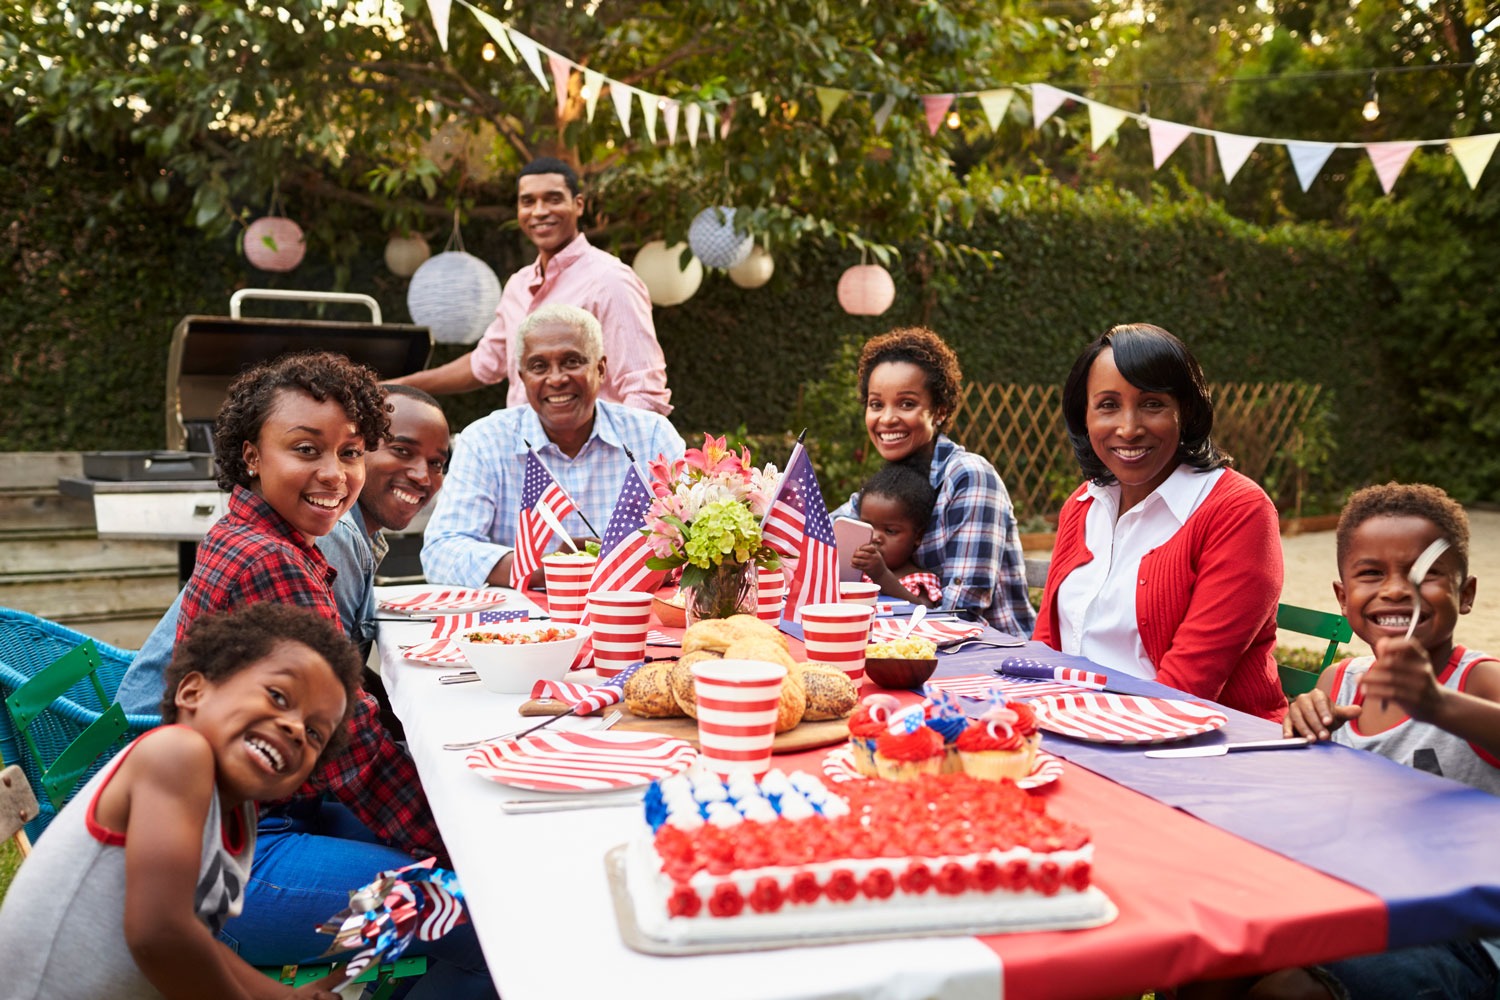 Fourth-of-July-Safety-How-to-Celebrate-Safe-and-Fun-picnics-block-parties